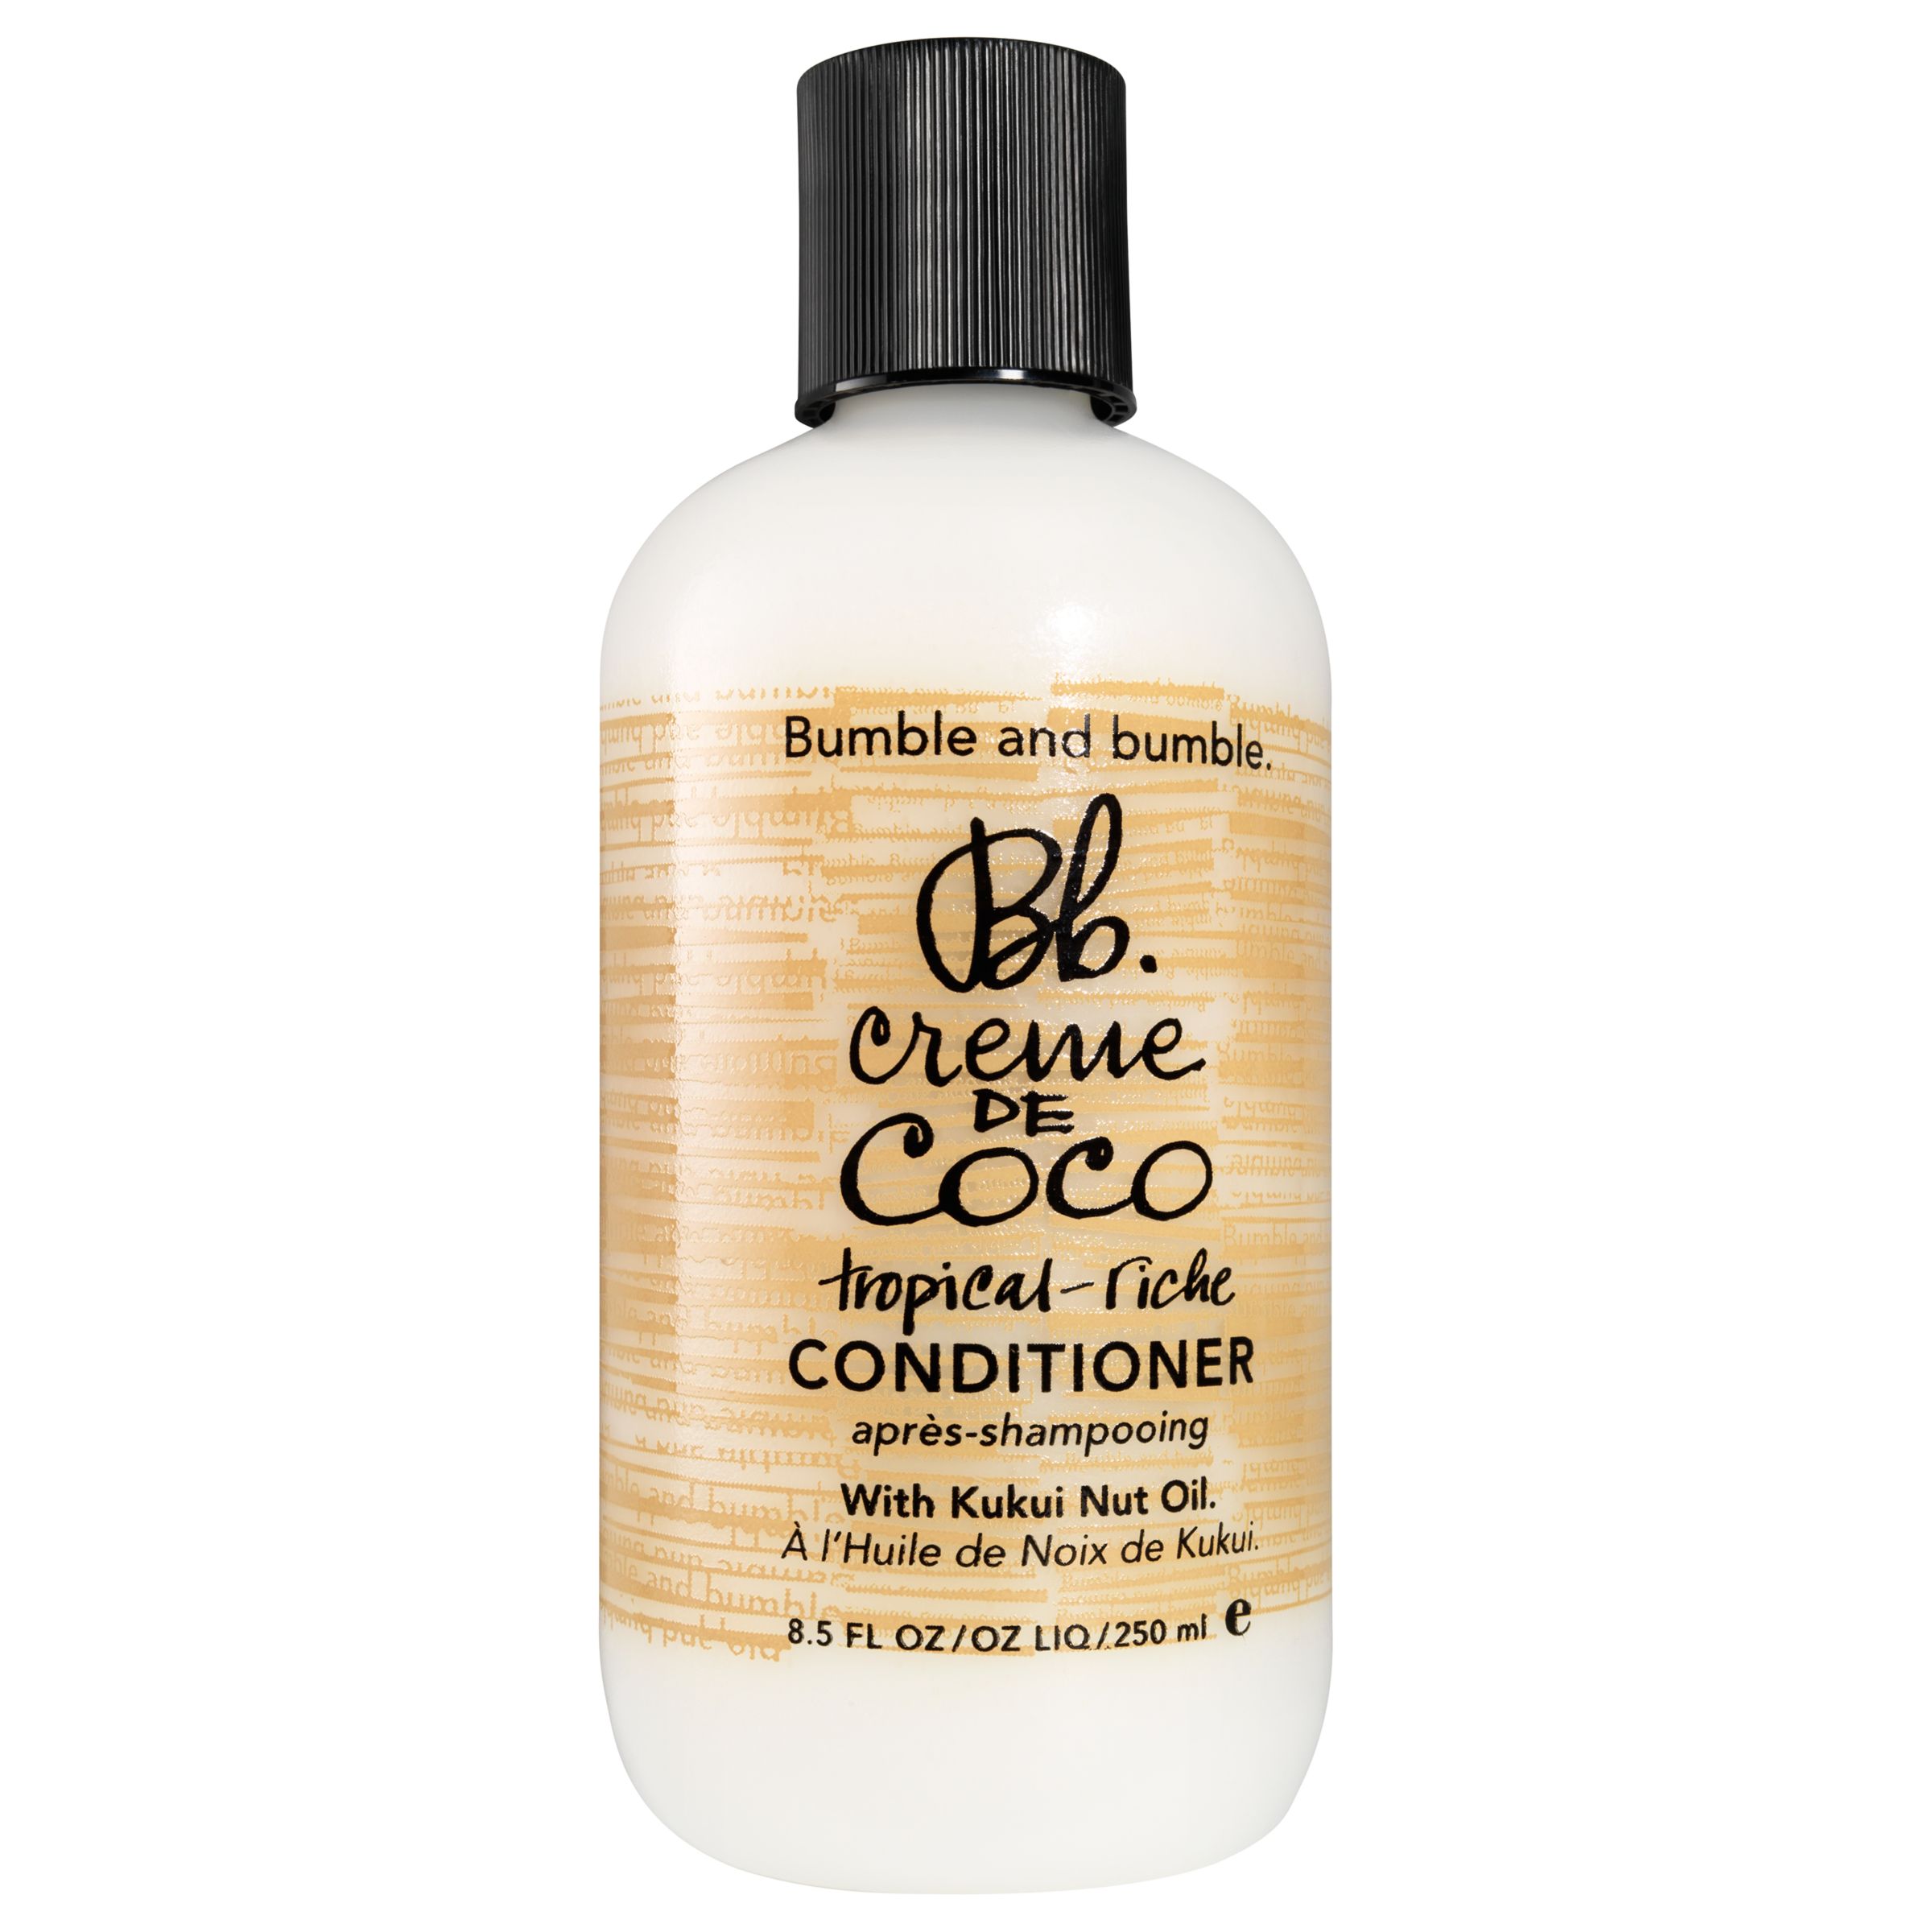 Bumble and bumble Creme De Coco Conditioner, 250ml 1